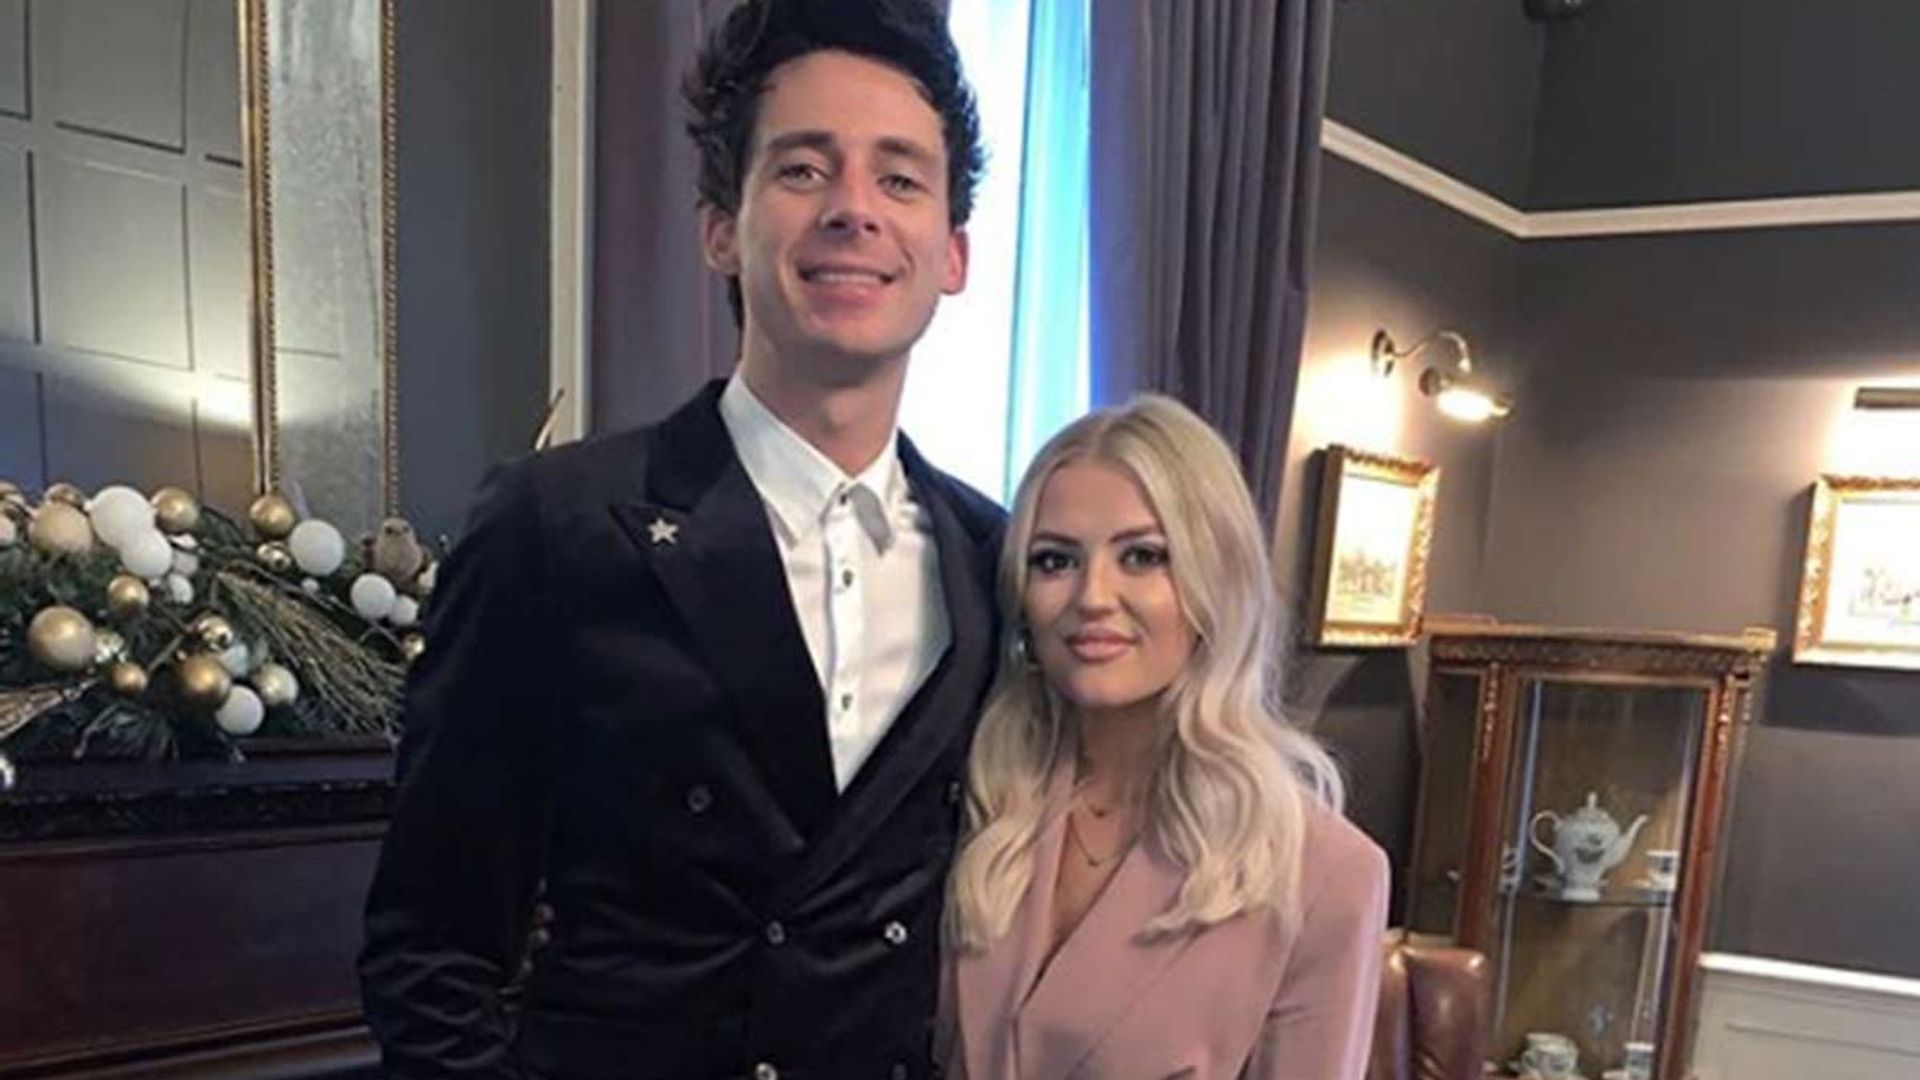 Lucy Fallon nails winter wedding guest style in Topshop suit – and it's got 10% off